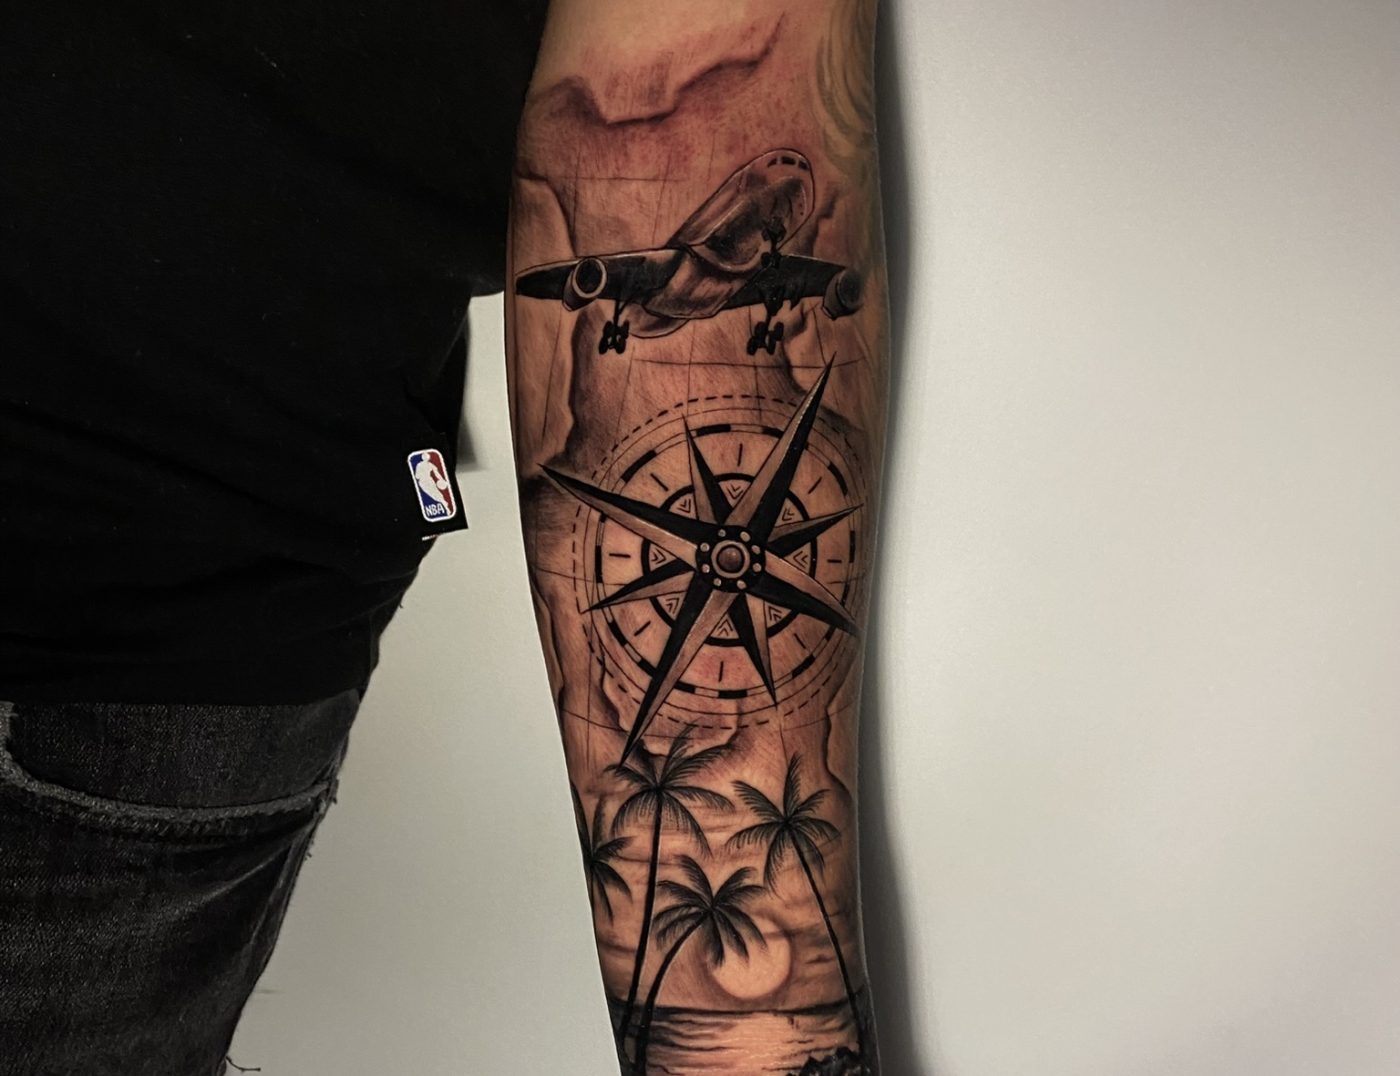 Airplane, Compass & Beach Blackwork Tattoo By Rene Cristobal. Rene inked this tattoo for a customer that loves to travel. Call 404-973-7828 or stop by for a free consultation.